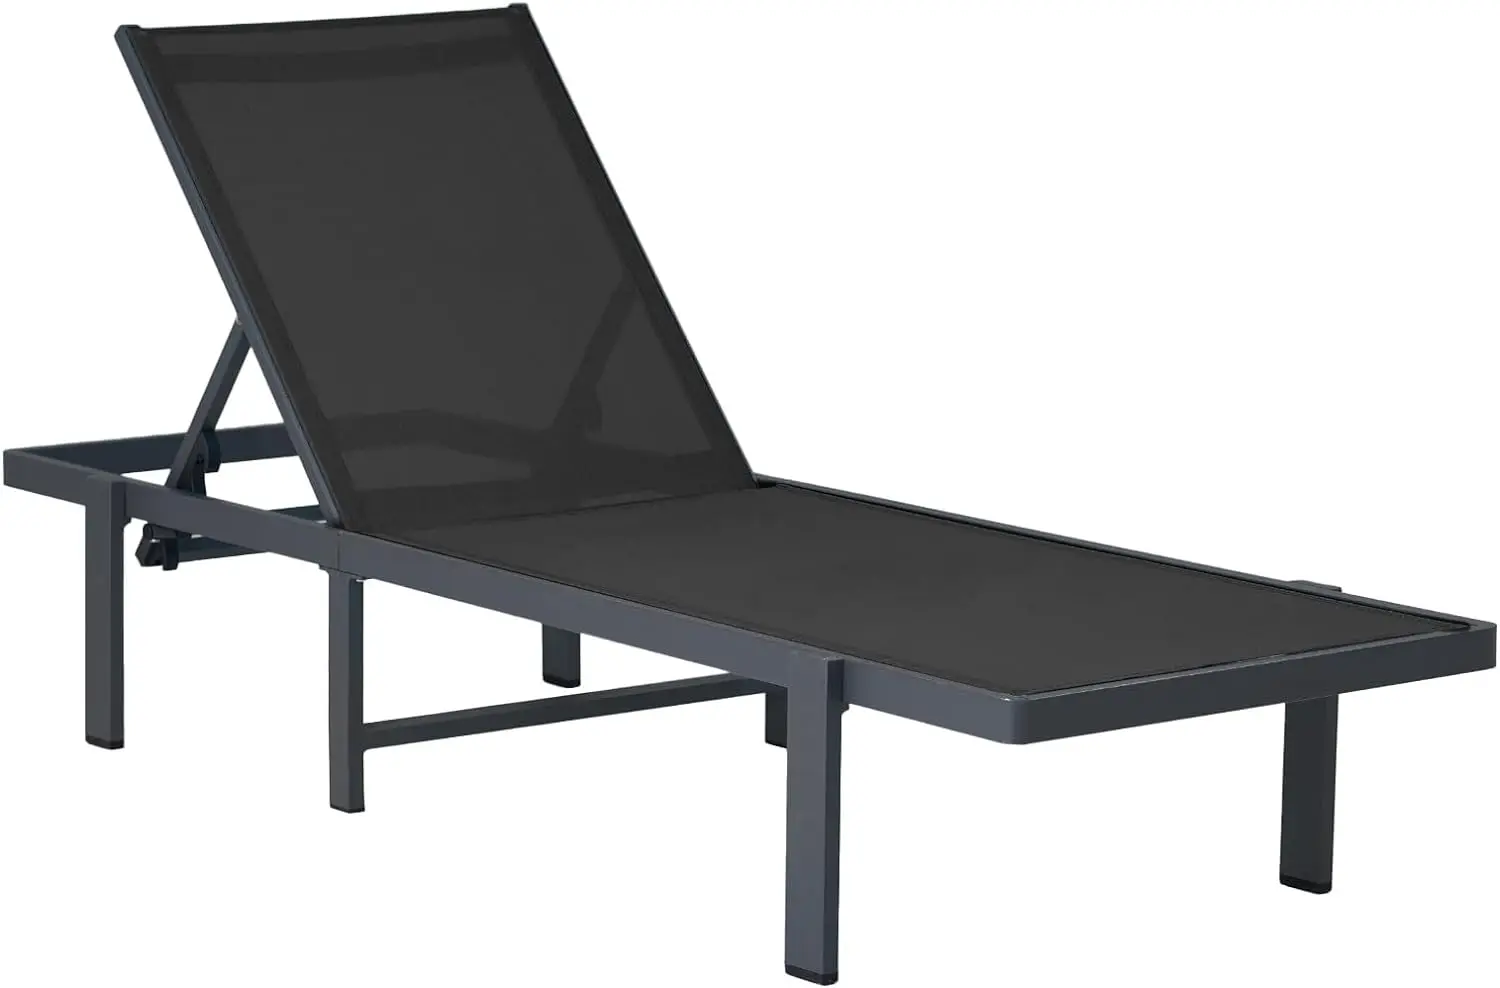 

Aluminum Chaise Lounge Chair Outdoor, Patio Lounge Chair with Adjustable 5-Position Recliner and Full Flat Tanning for Pool,